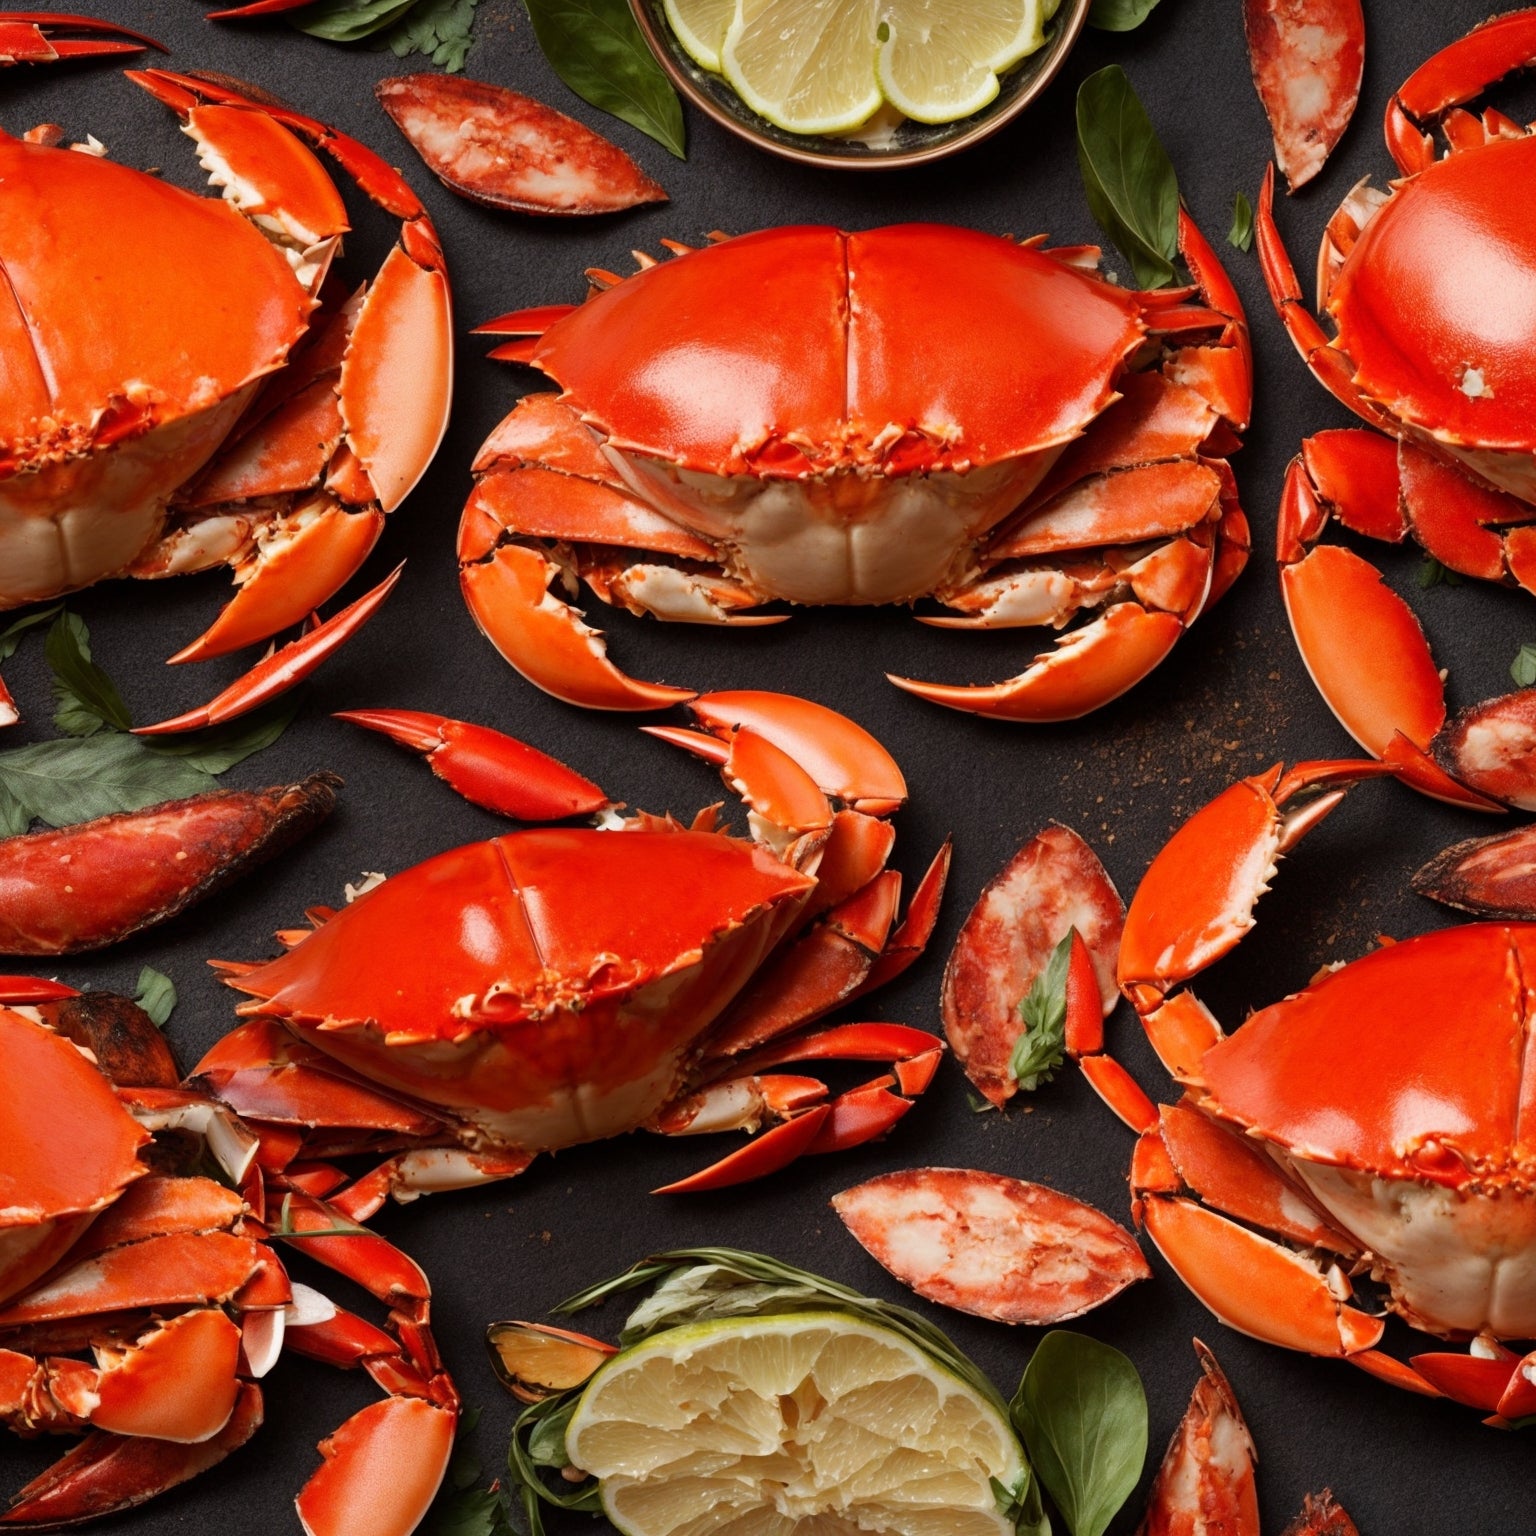 A Culinary Treasure: How to Make the Most of Fresh Crab Meat